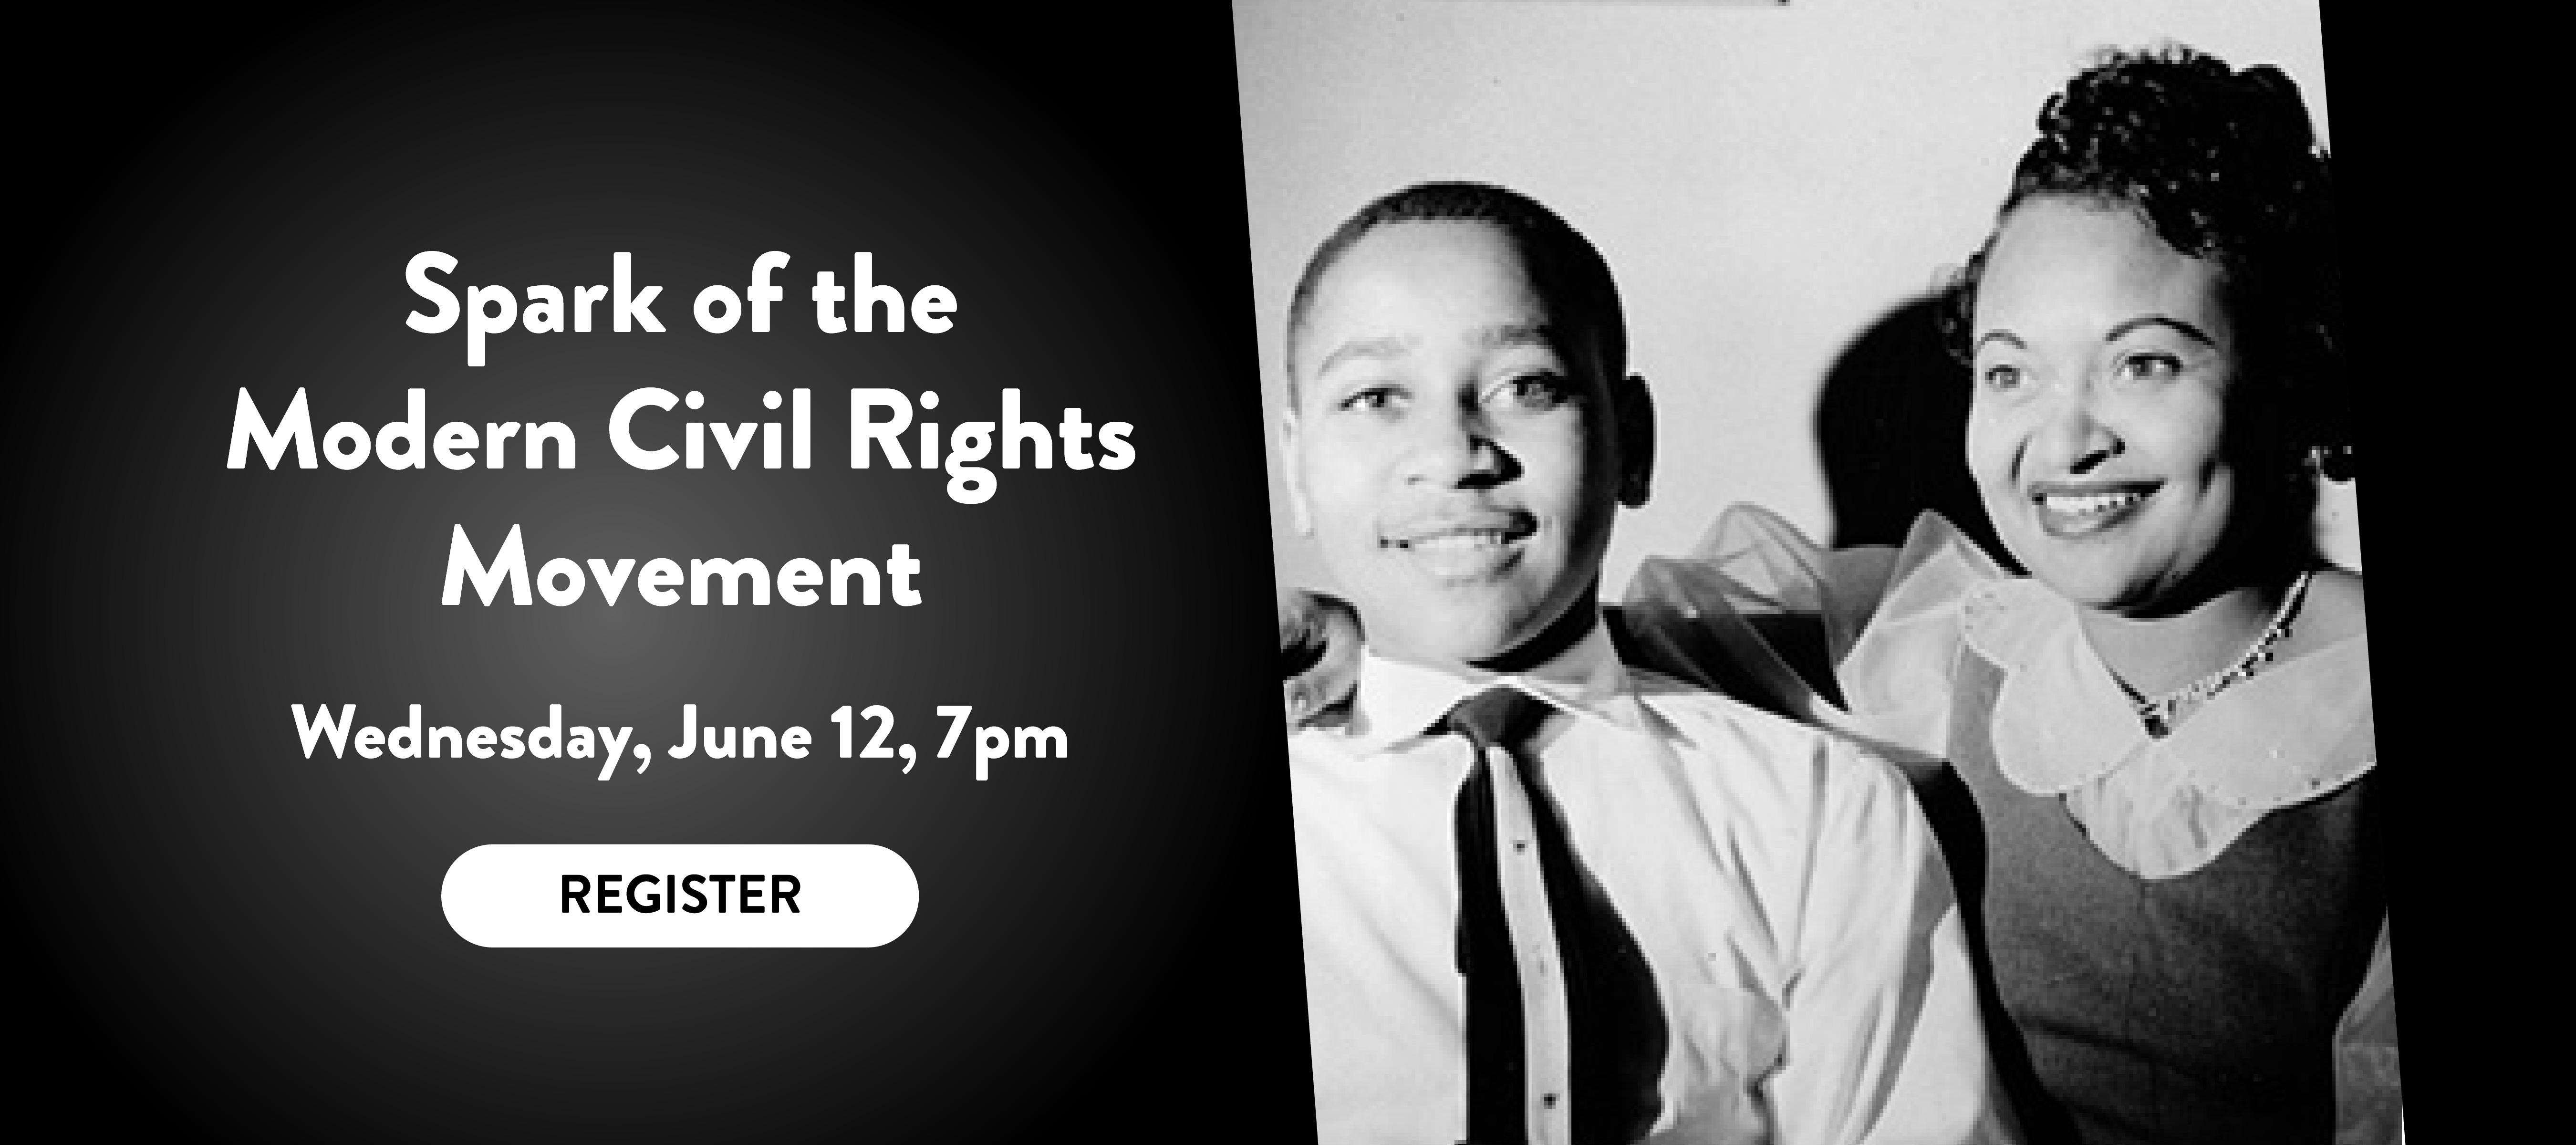 phpl, Prospect Heights Public Library, Spark of the Modern Civil Rights Movement, Emmett Till, Mamie Till, historical, Mike and Tina Small, in-person presentation, Adult